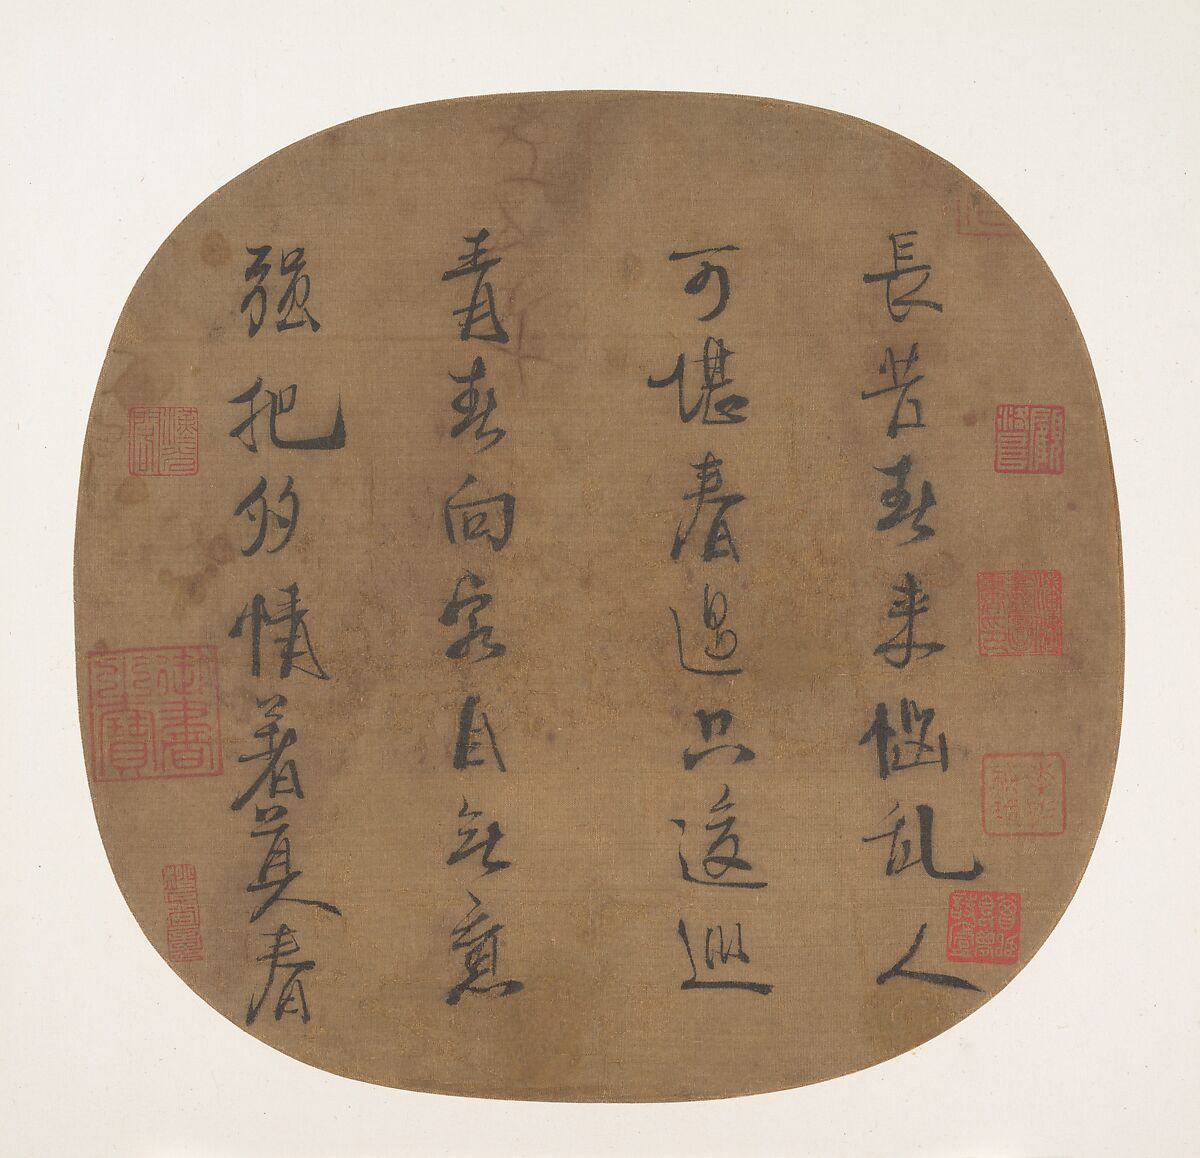 Quatrain on Late Spring, Emperor Lizong (Chinese, 1205–64, r. 1224–64), Fan mounted as an album leaf; ink on silk, China 